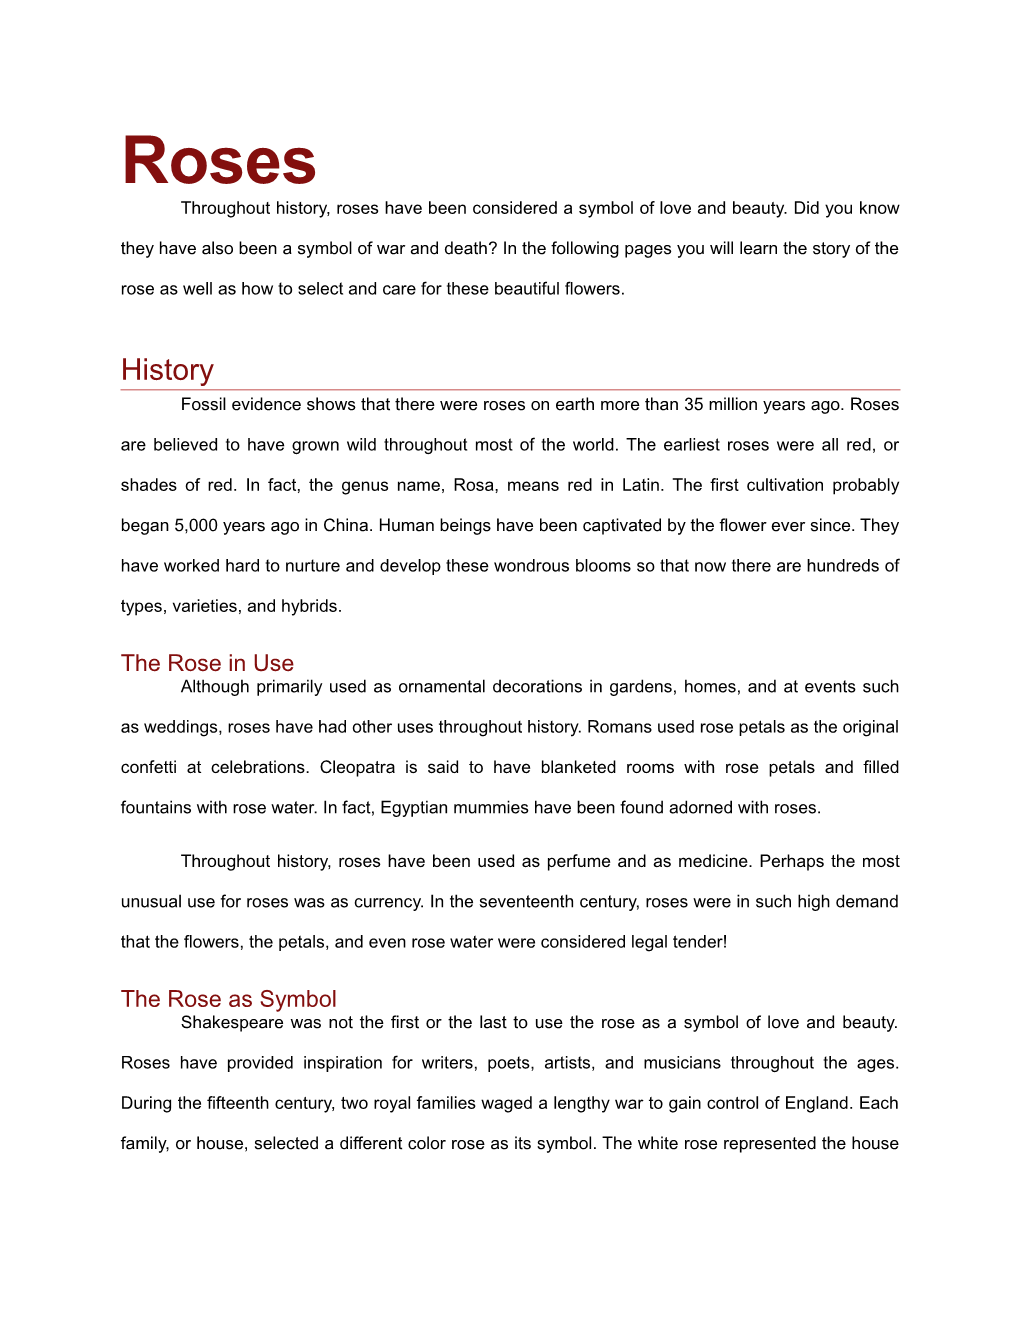 Throughout History, Roses Have Been Considered a Symbol of Love and Beauty. Did You Know